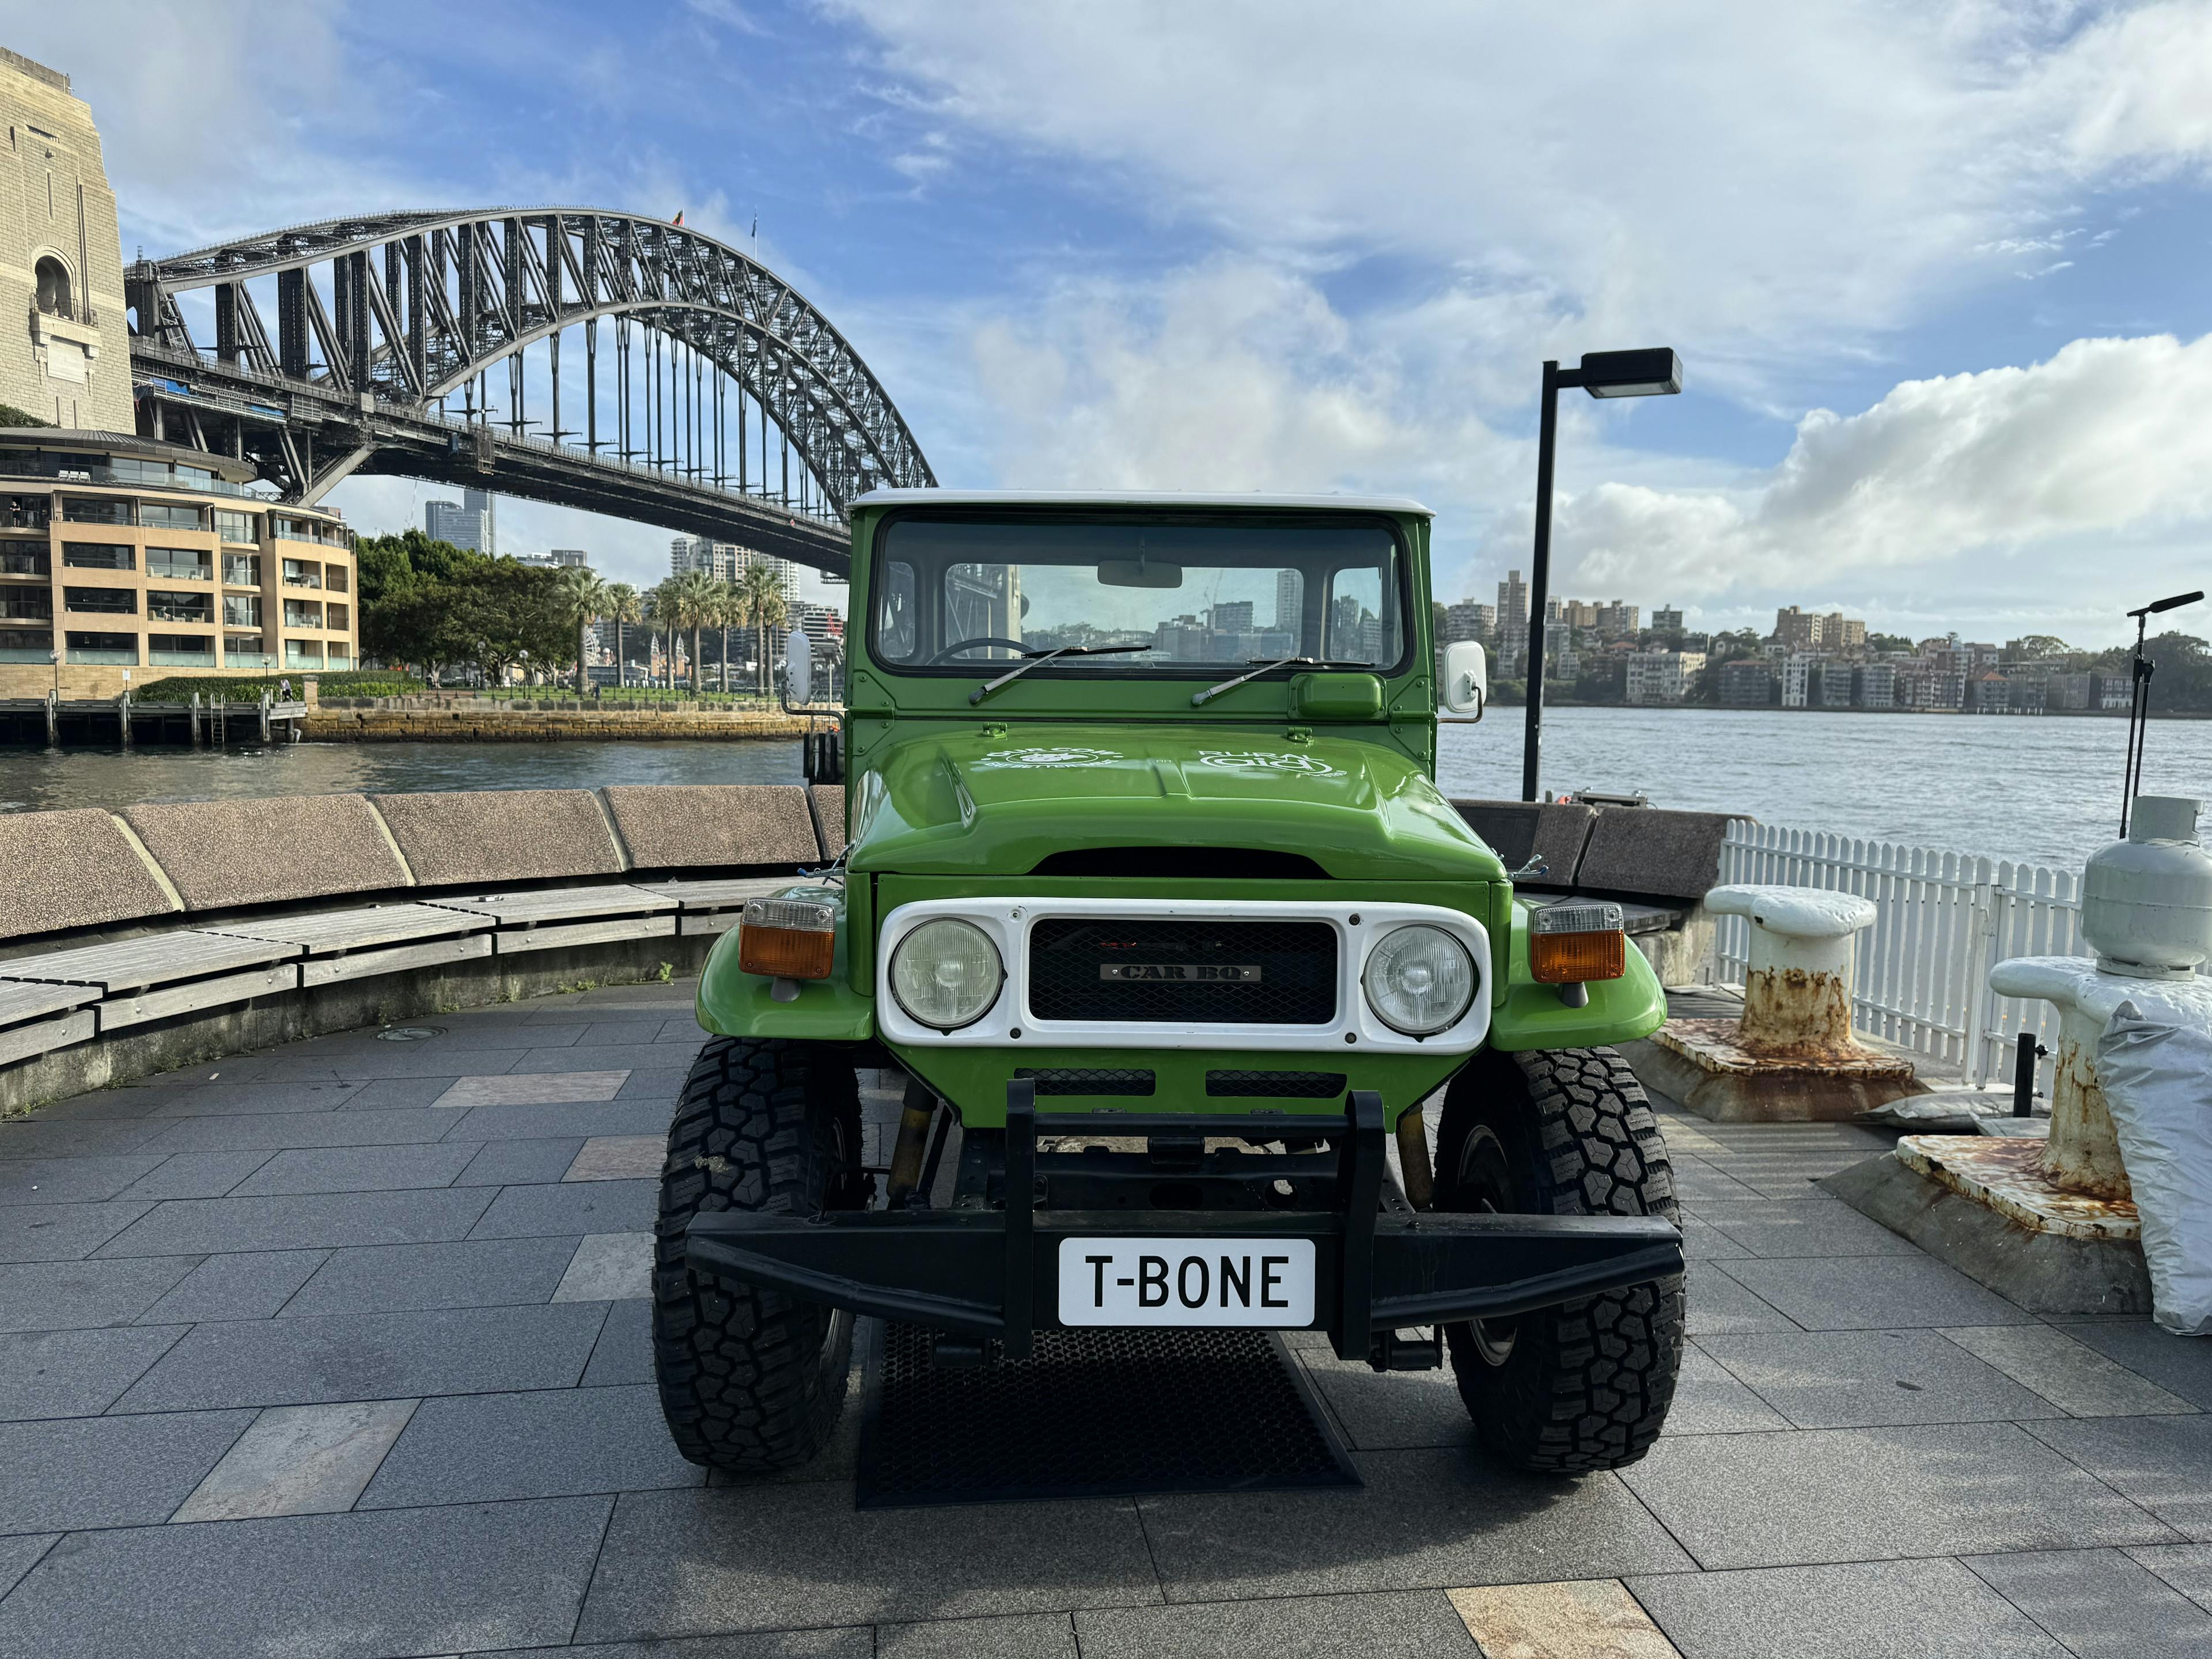 Our Cow takes on Sydney for ‘The Great Aussie BBQ’, in support of Rural Aid